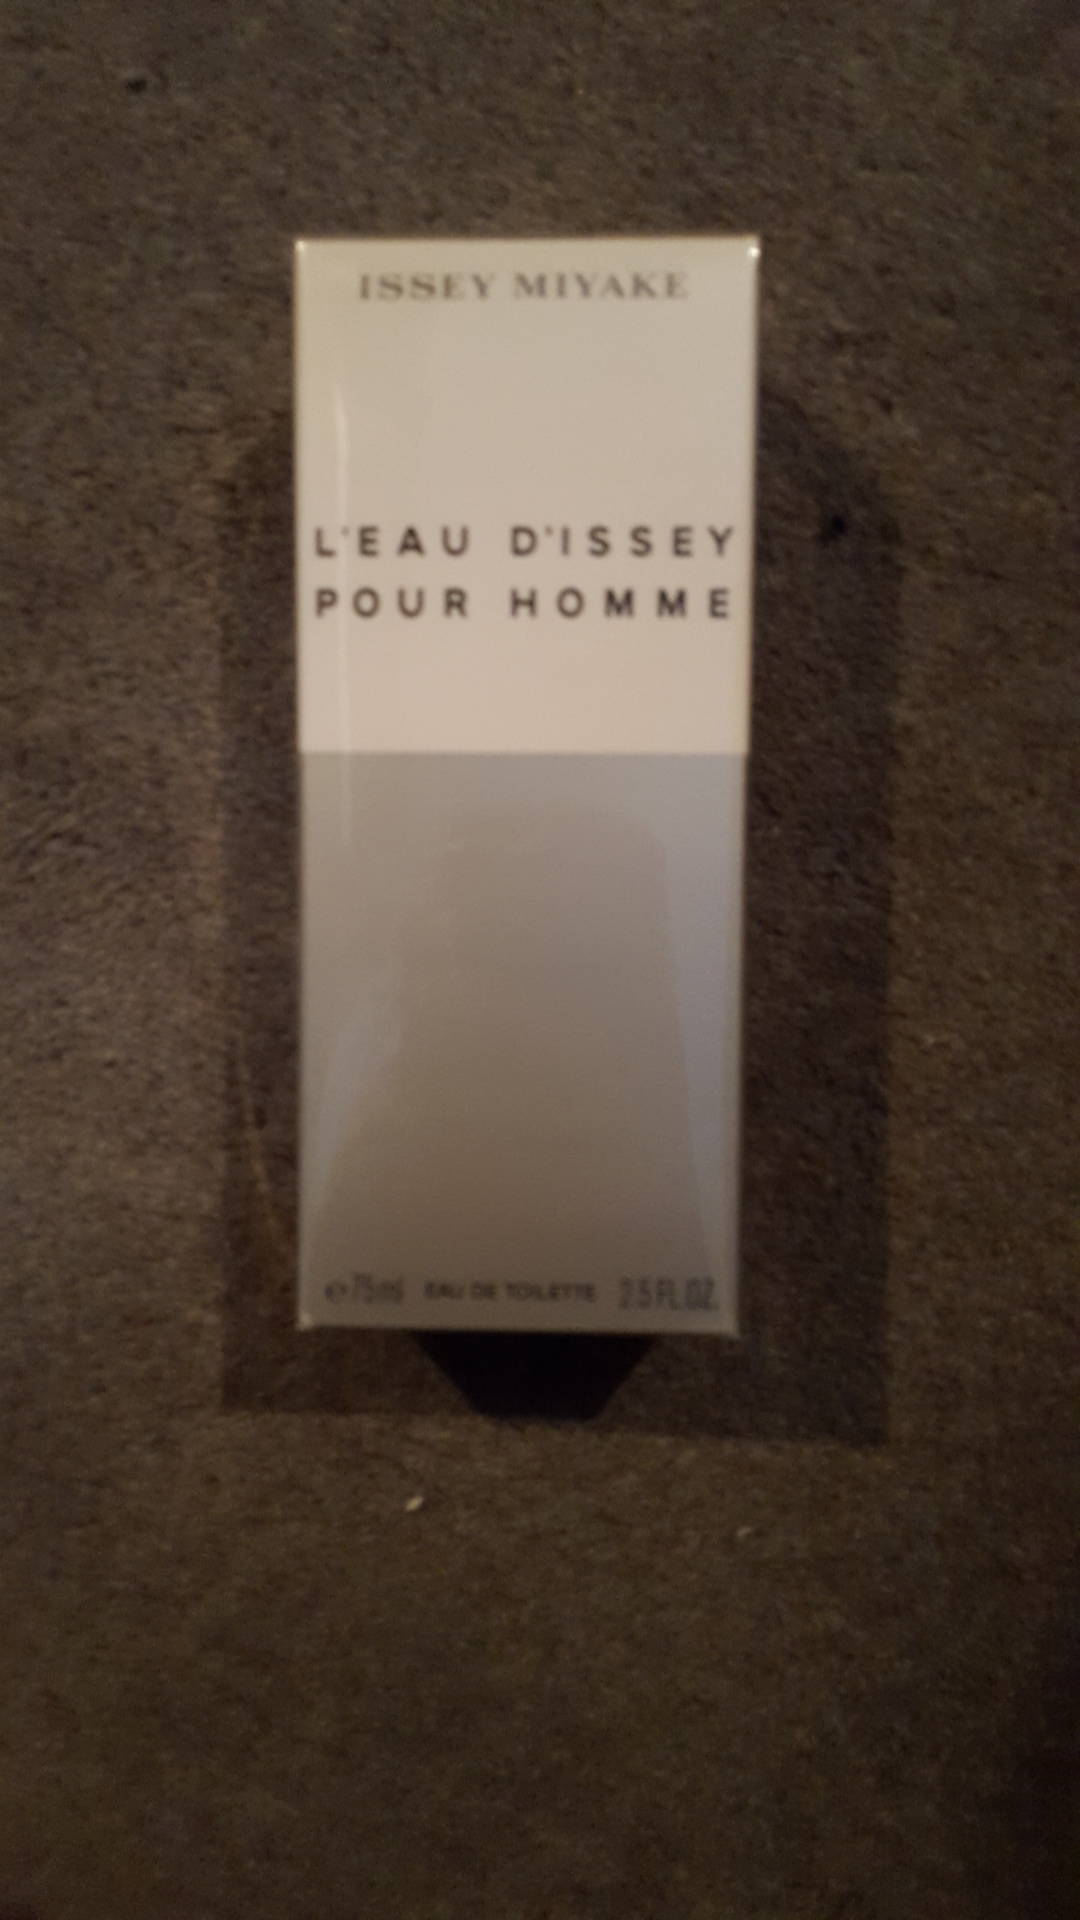 ISSEY MIYAKE - L'eau d'issey pour homme - parfums